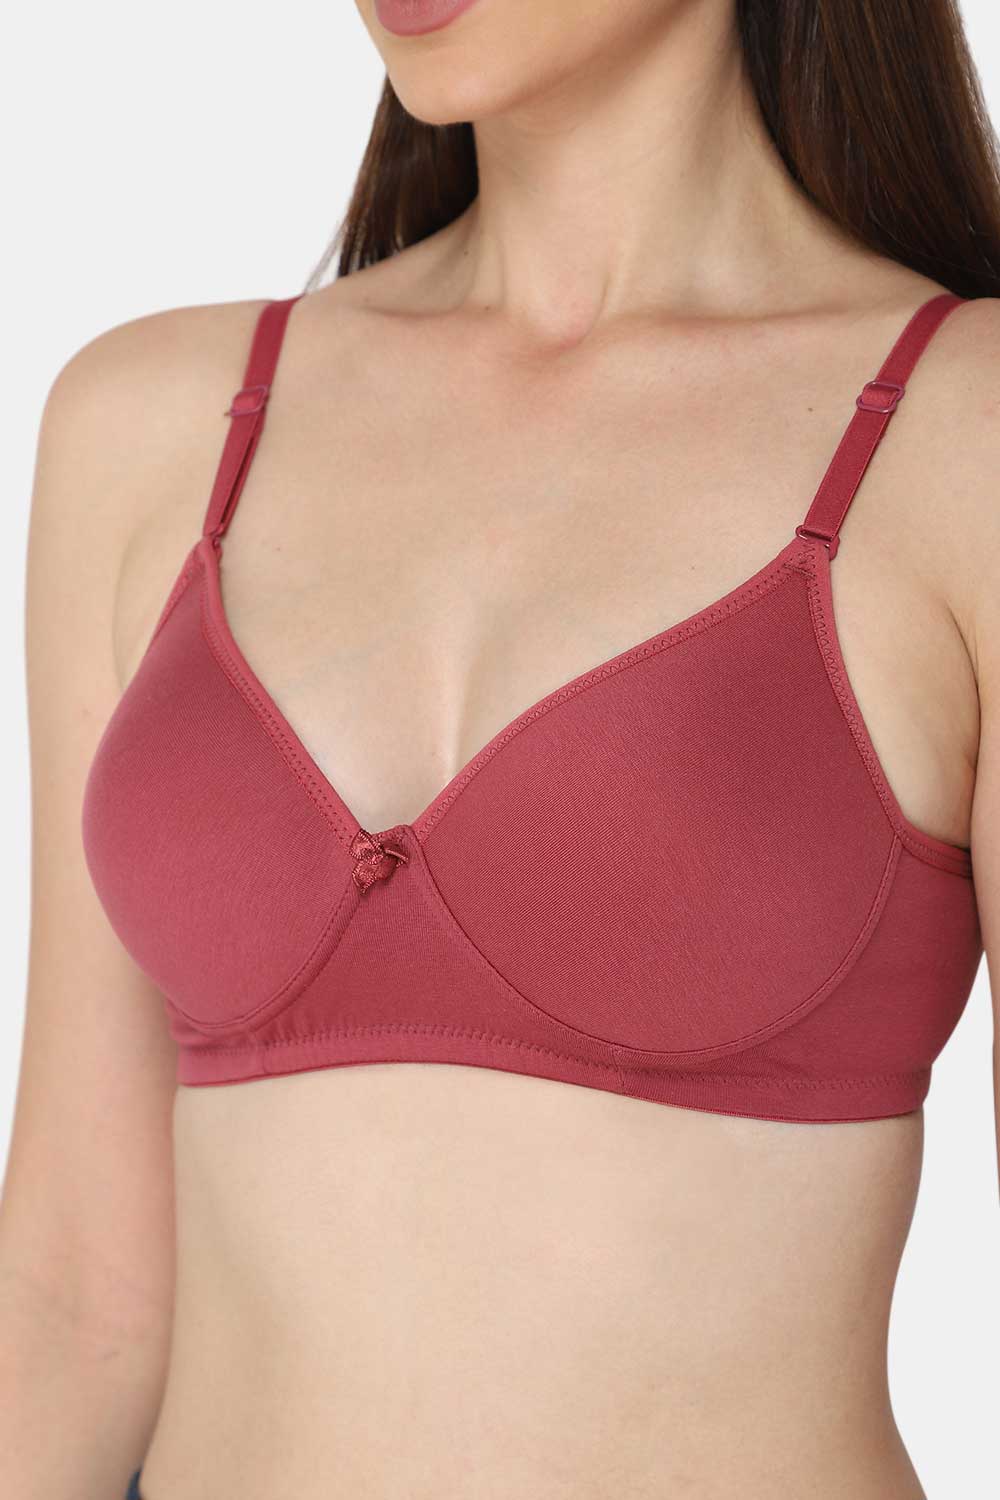 Buy Tanishqa Trylo Non-Wired Non-Stress Full Cup Hoisery Bra 4